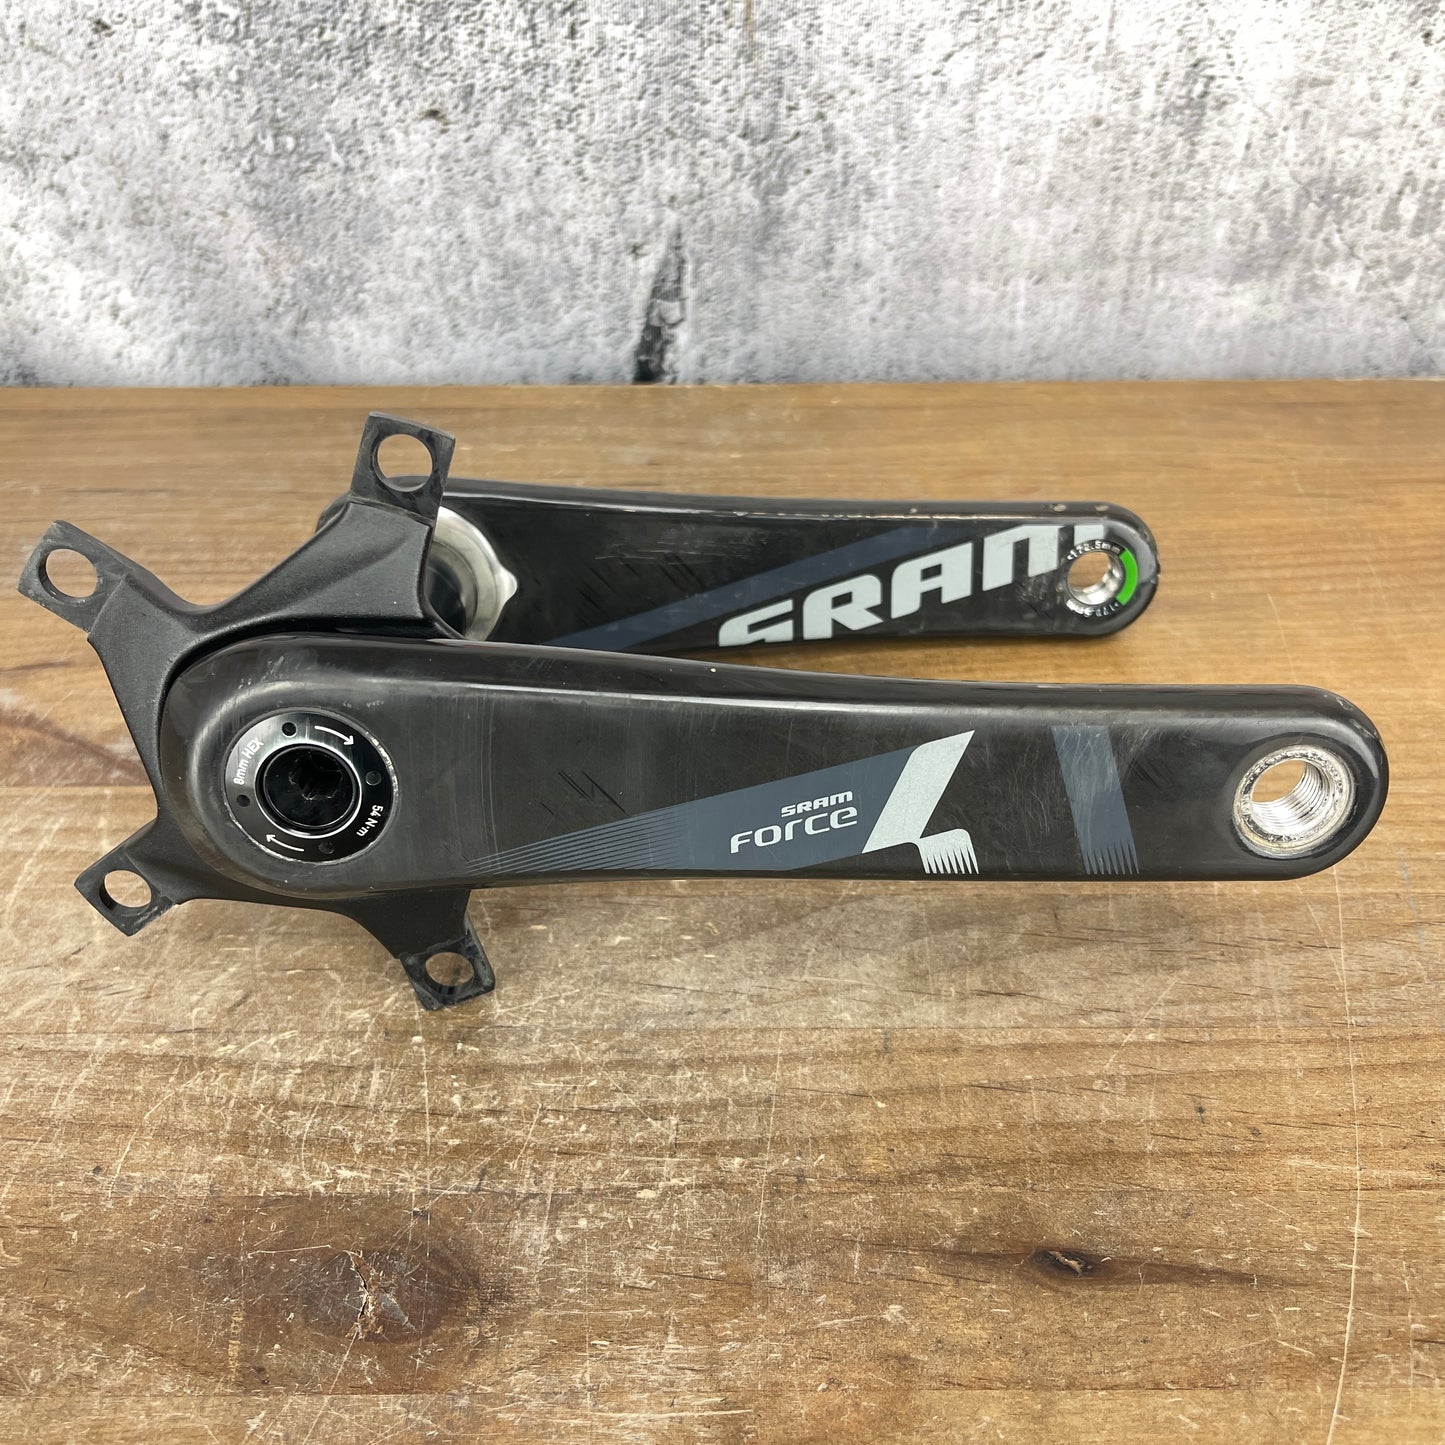 SRAM Force Carbon 172.5mm BB30 29mm Spindle Road Bike Crank Arms 505g